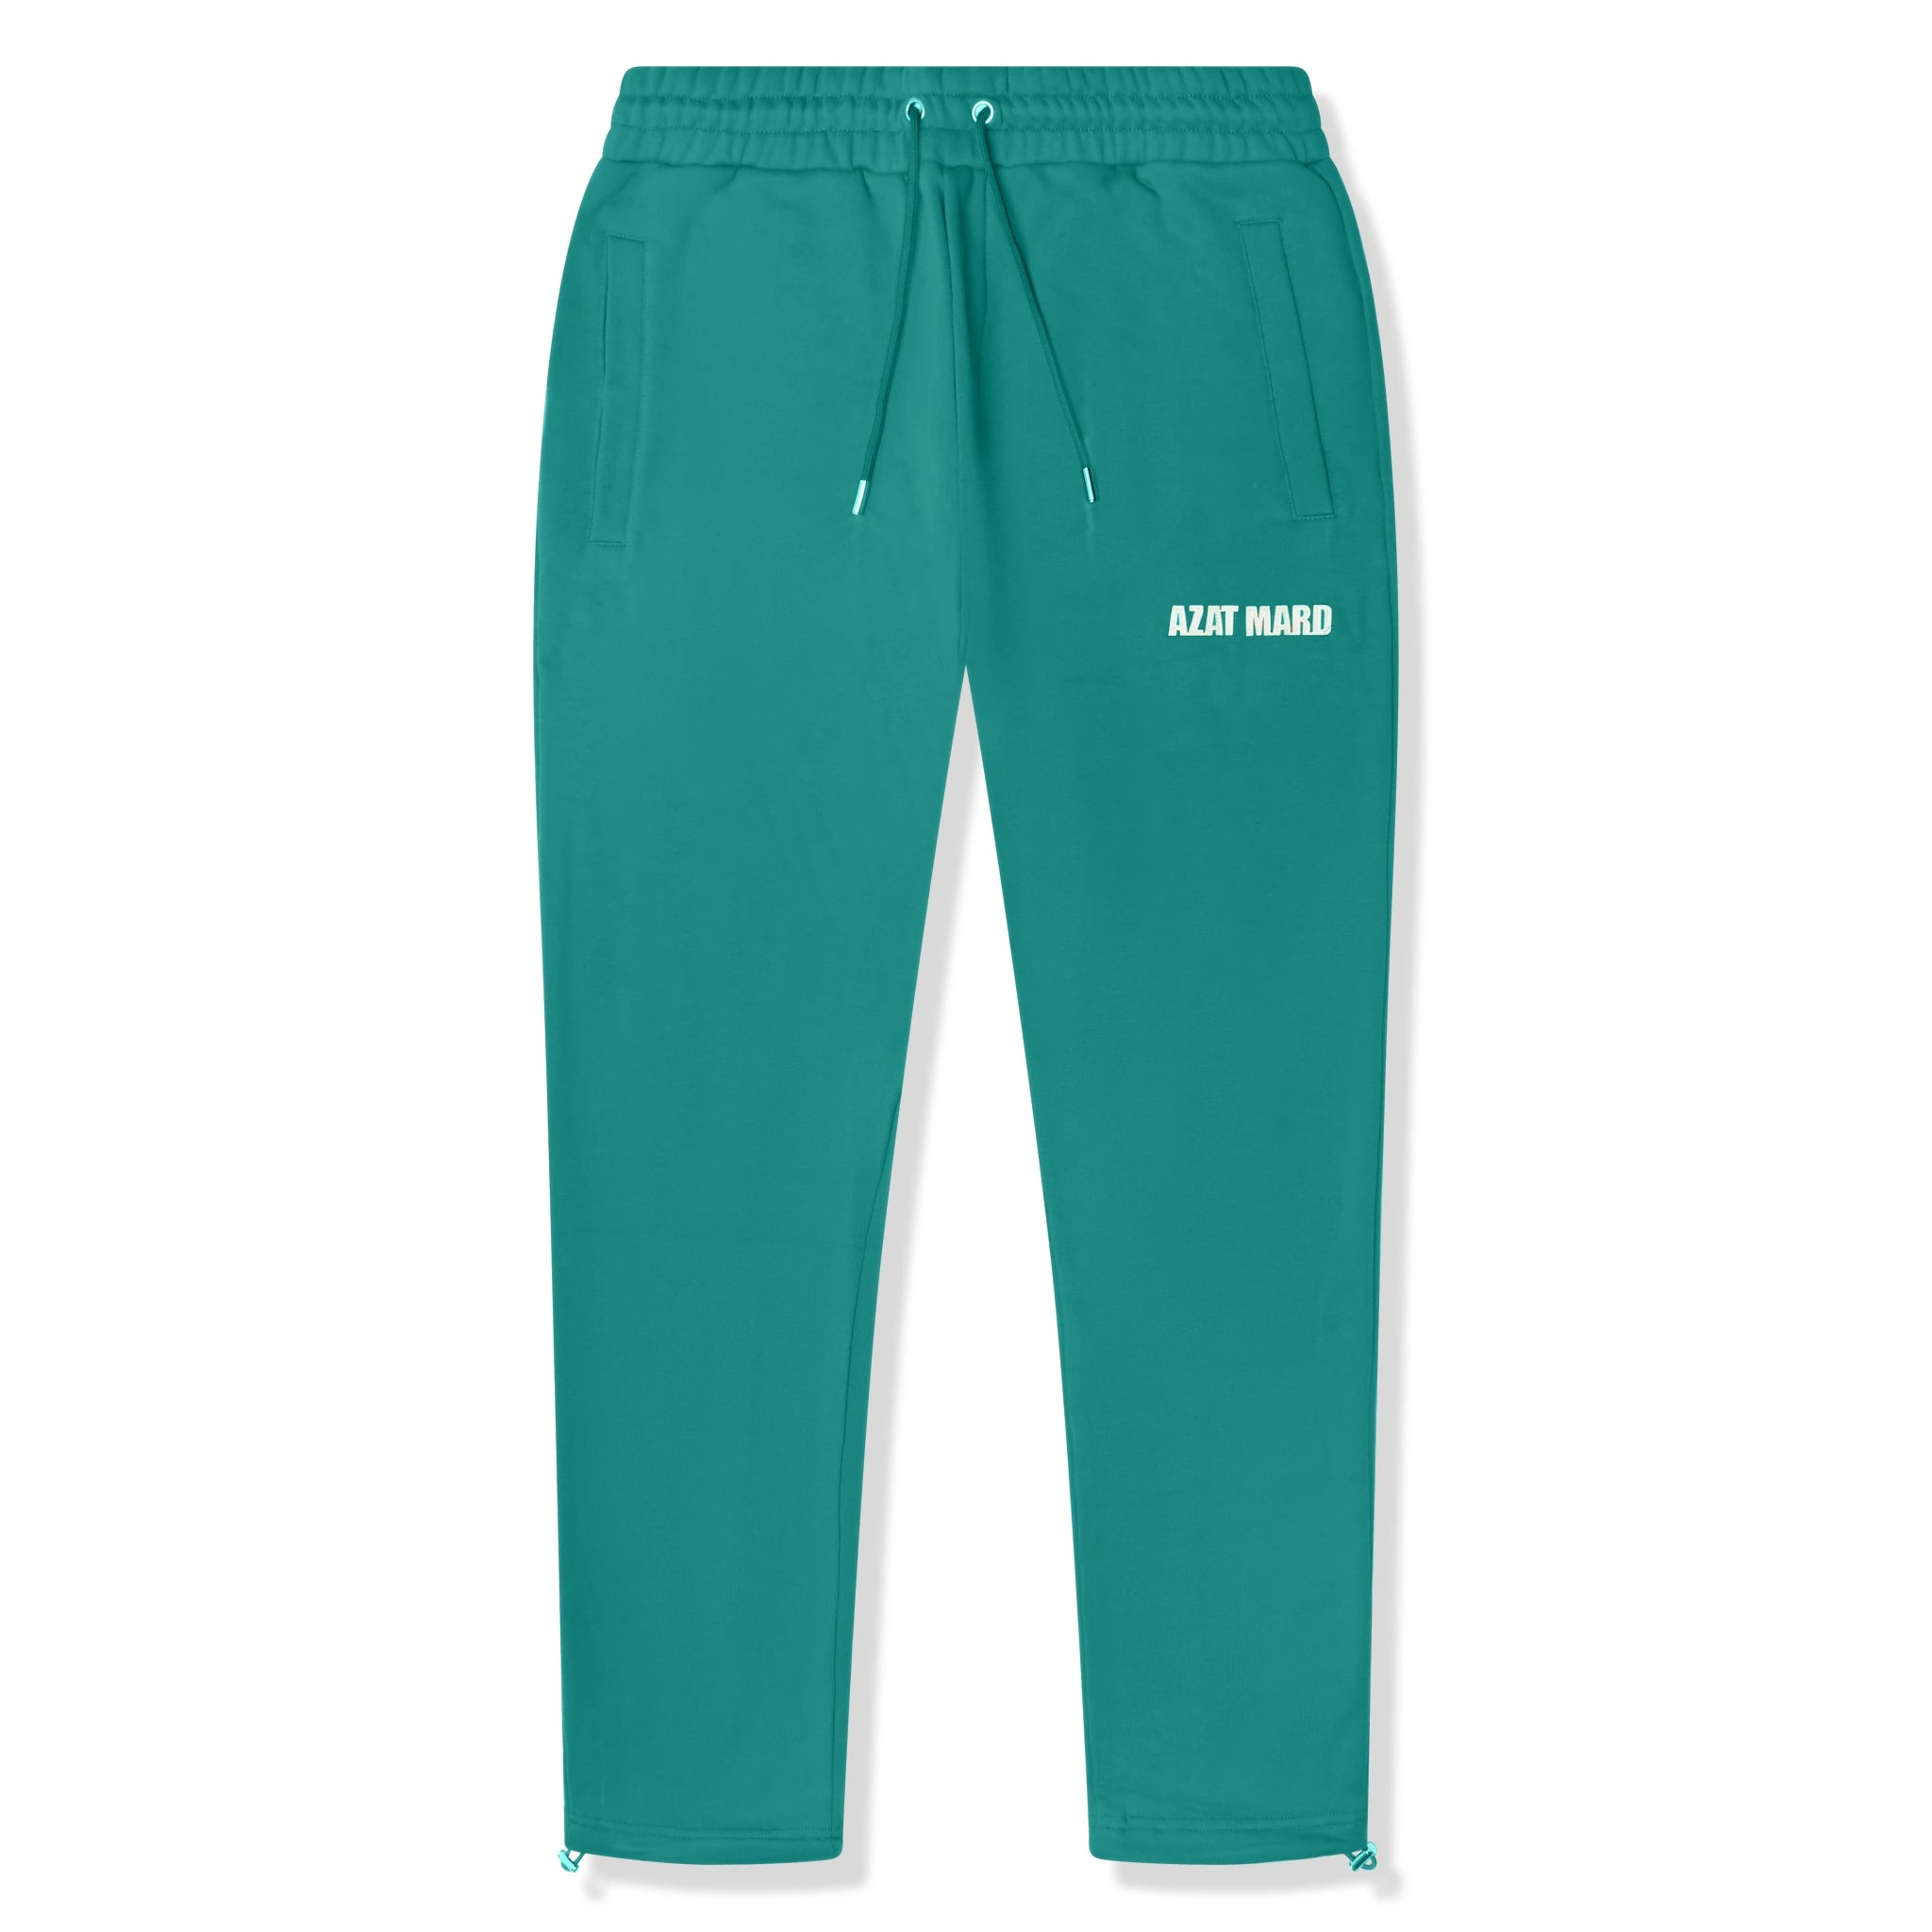 Front View of Azat Mard Country Club Green Sweatpants